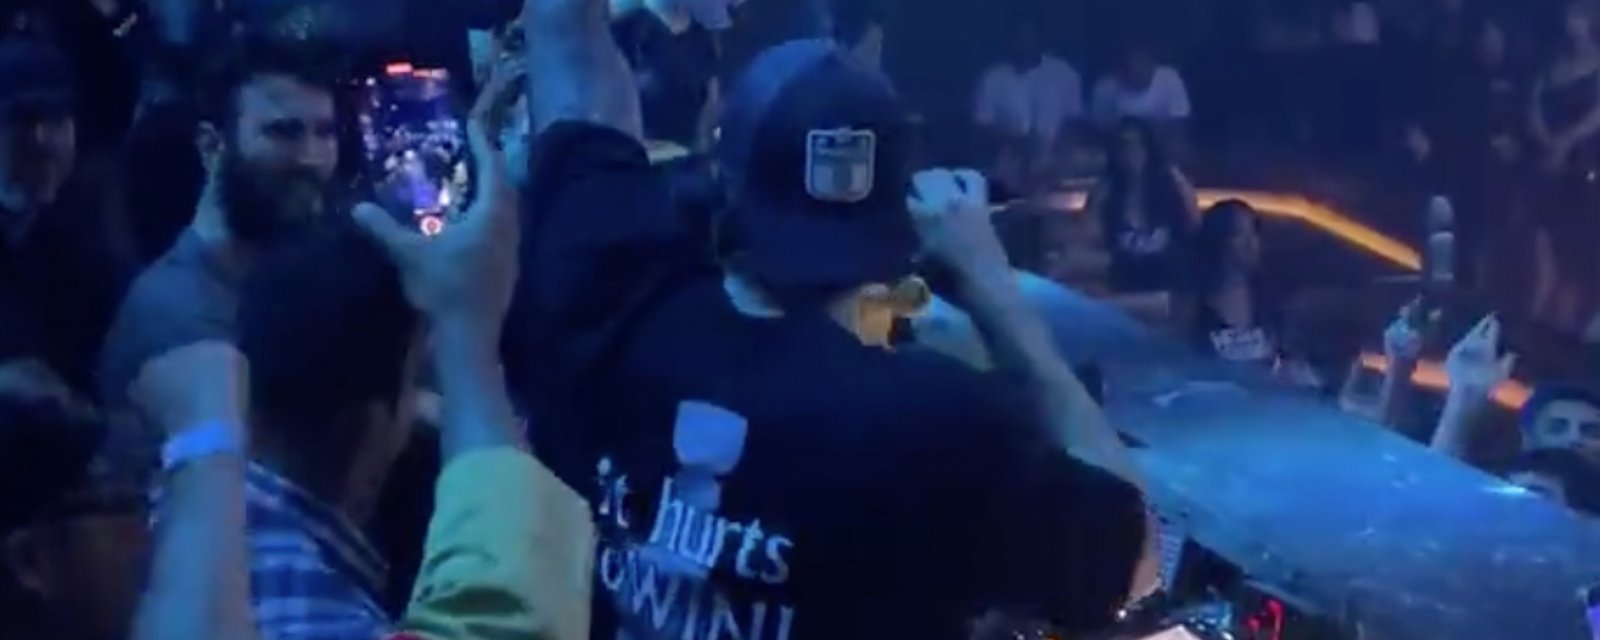 Goalie Adam Hill goes viral with unique Stanley Cup celebration in Vegas’ nightclub